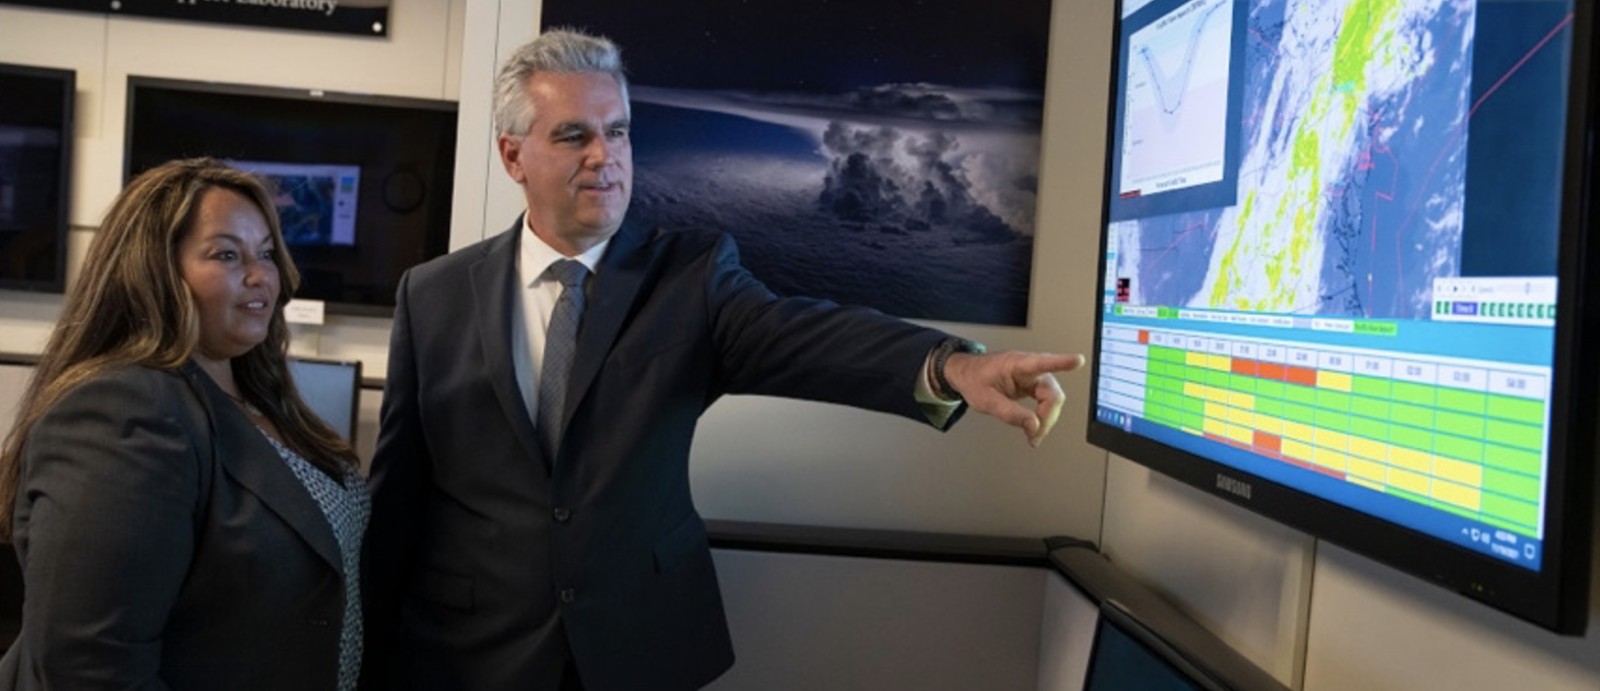 Two researchers stand and point at a screen displaying air traffic control imagery.